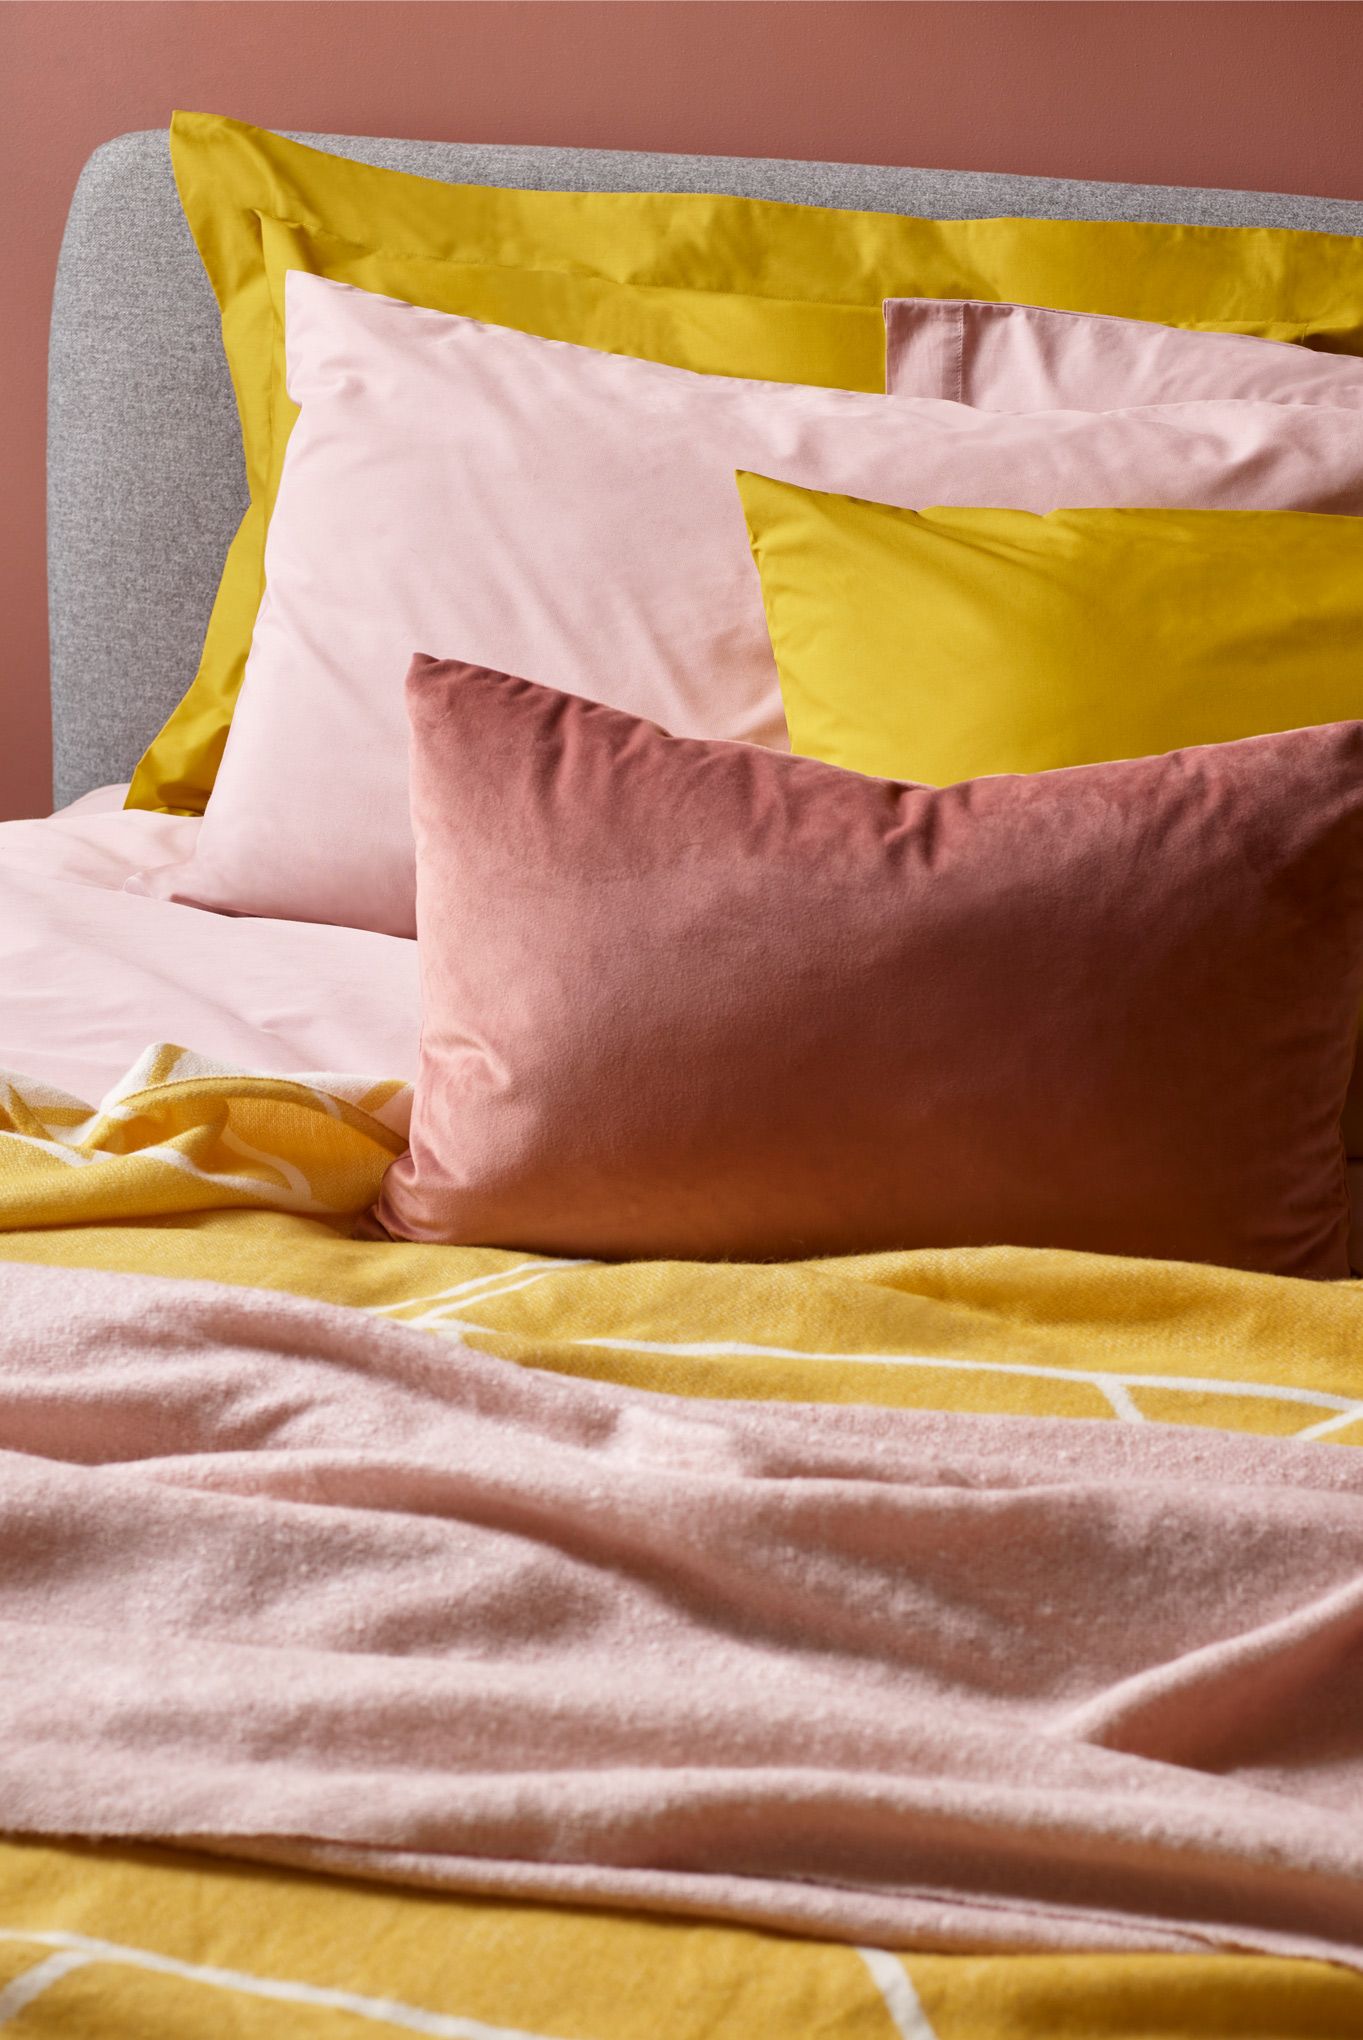 ANYDAY John Lewis & Partners Easy Care 200 Thread Count Polycotton Bedding, Mustard £3.50 - £32.00